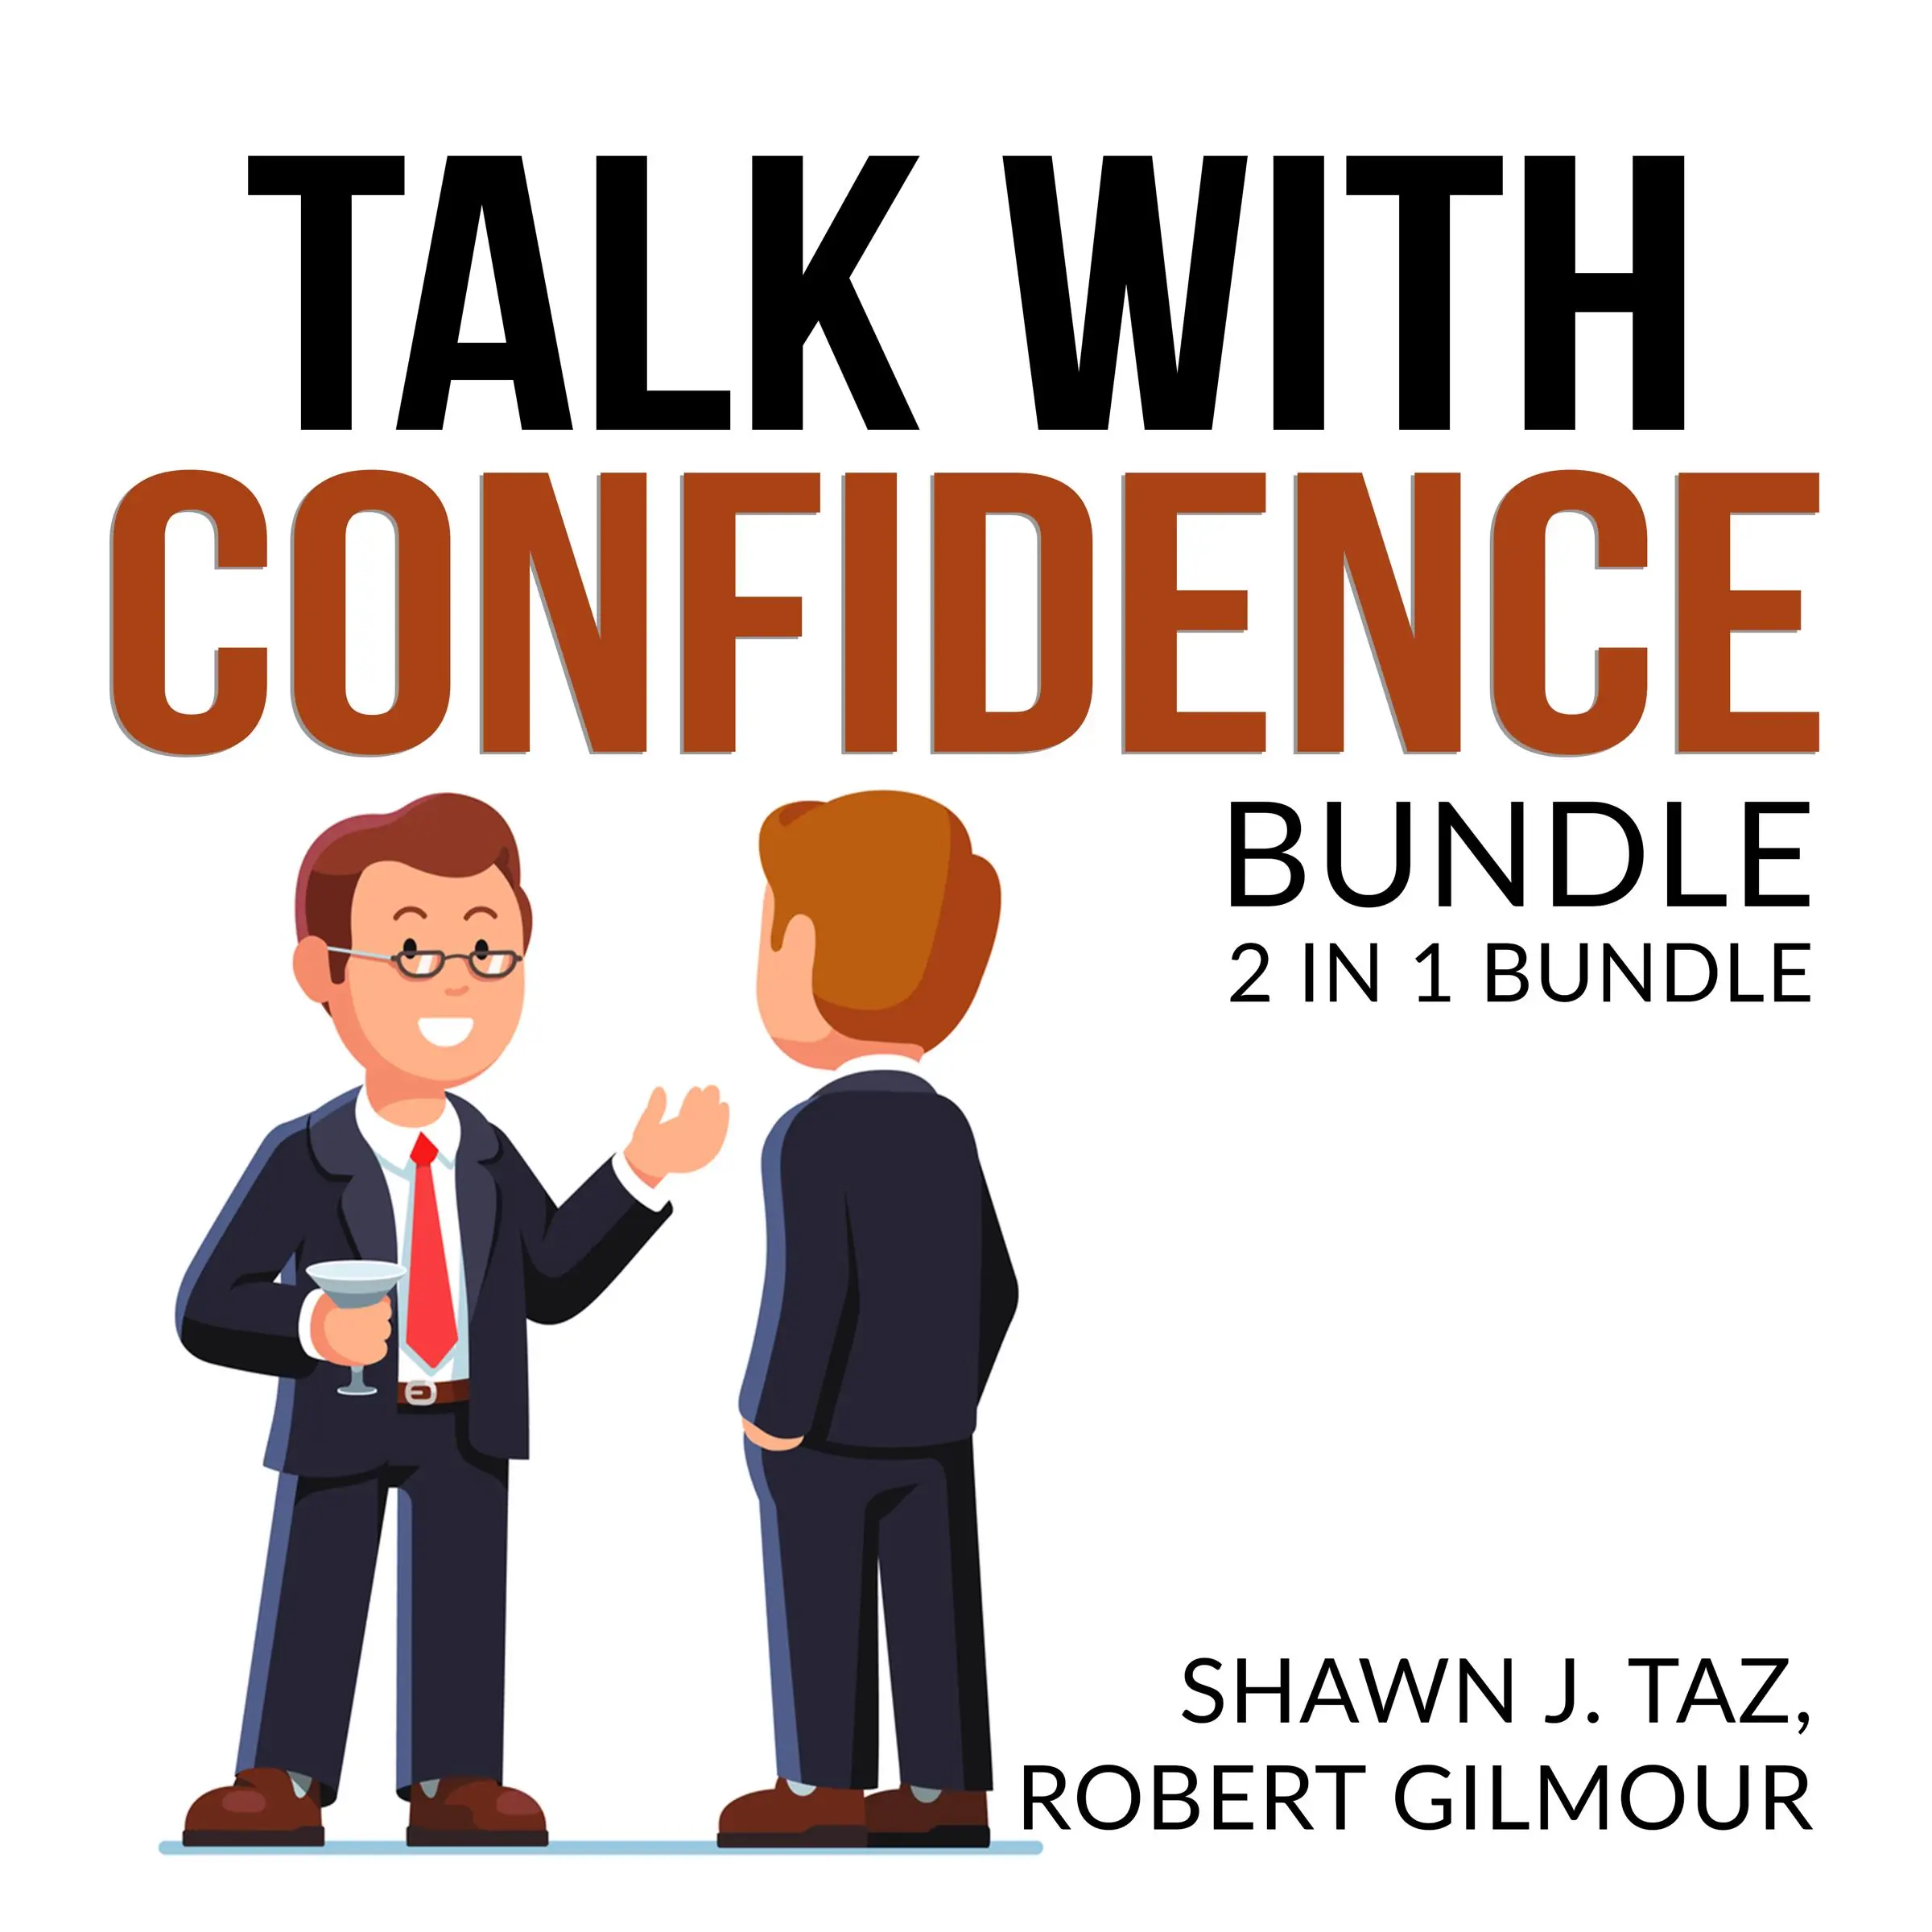 Talk With Confidence Bundle, 2 in 1 Bundle, Exactly What to Say and Speak With No Fear Audiobook by Shawn J. Taz and Robert Gilmour